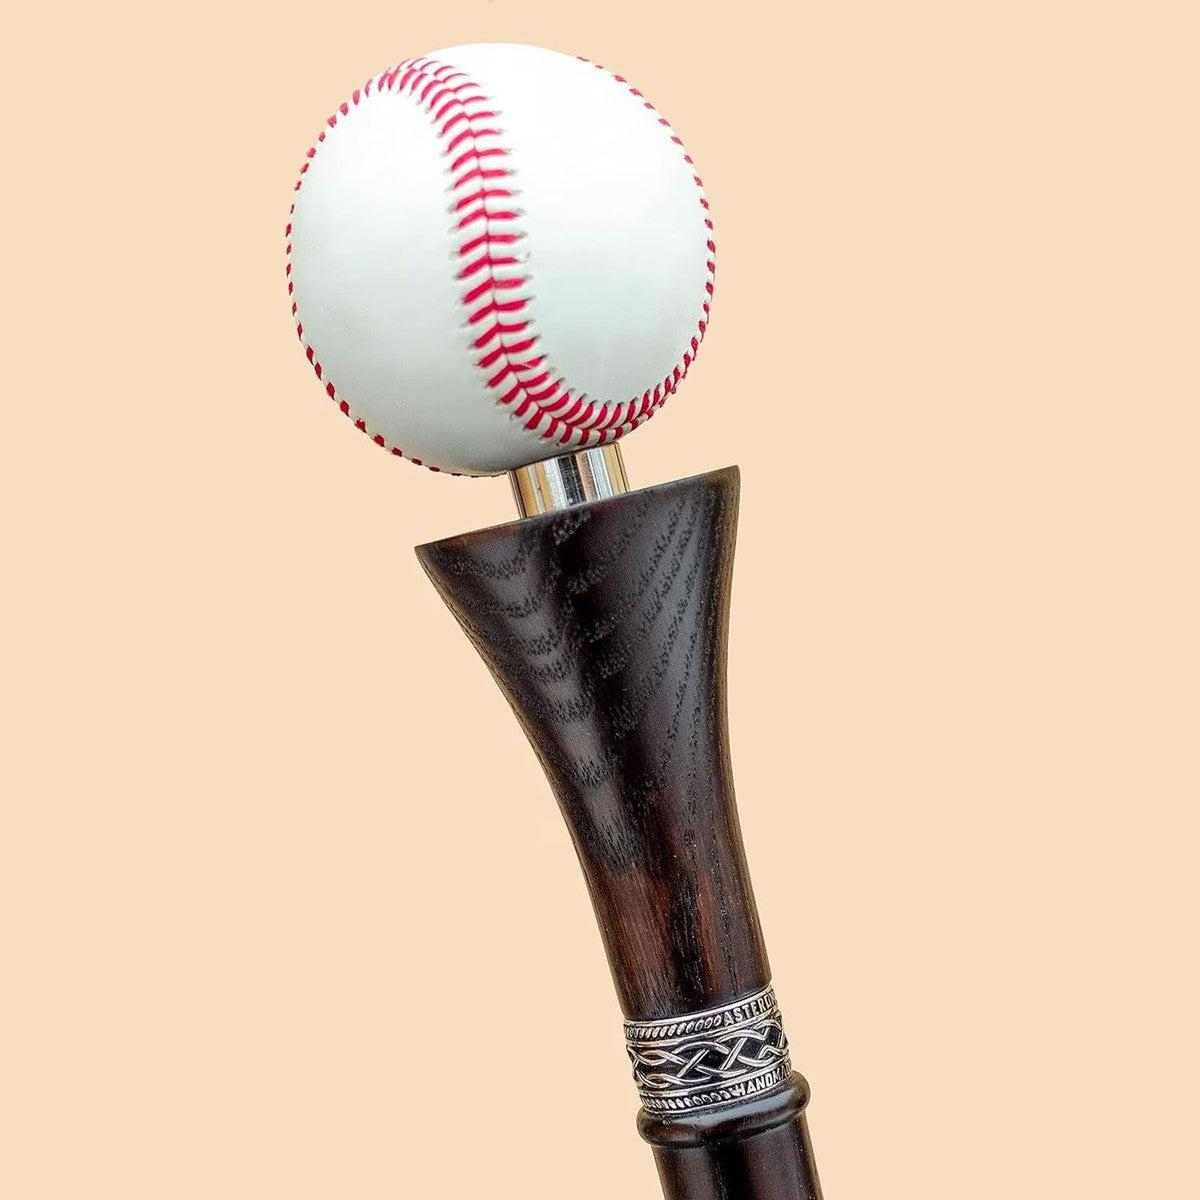 "Handcrafted Wooden Walking Cane for Men with Custom Baseball Knob - Elegant and Unique Carved Wood Walking Stick"